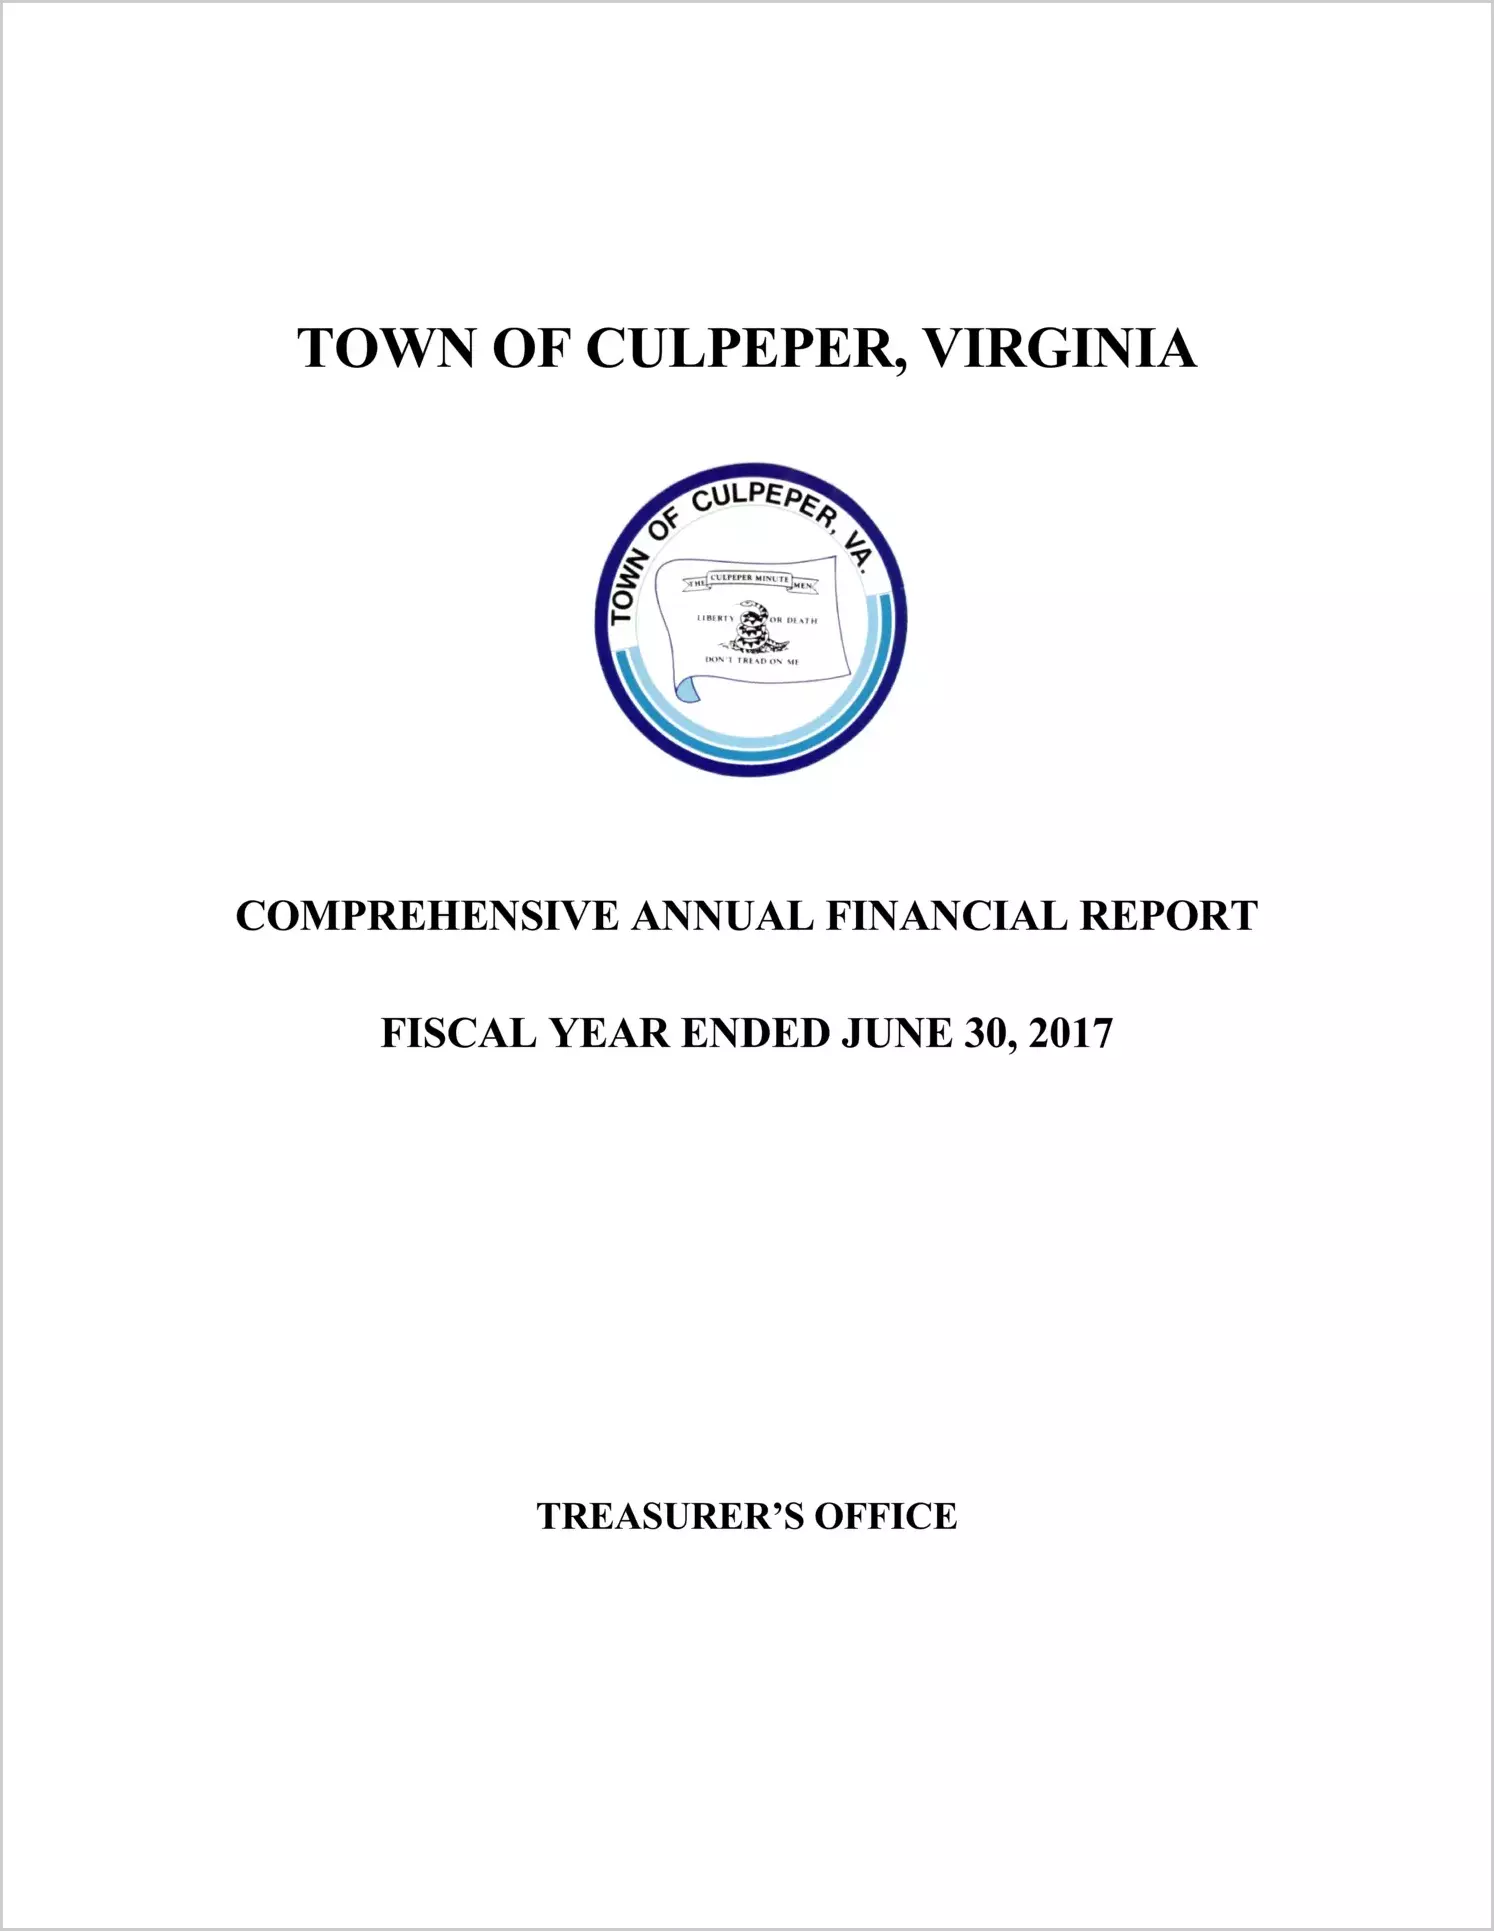 2017 Annual Financial Report for Town of Culpeper